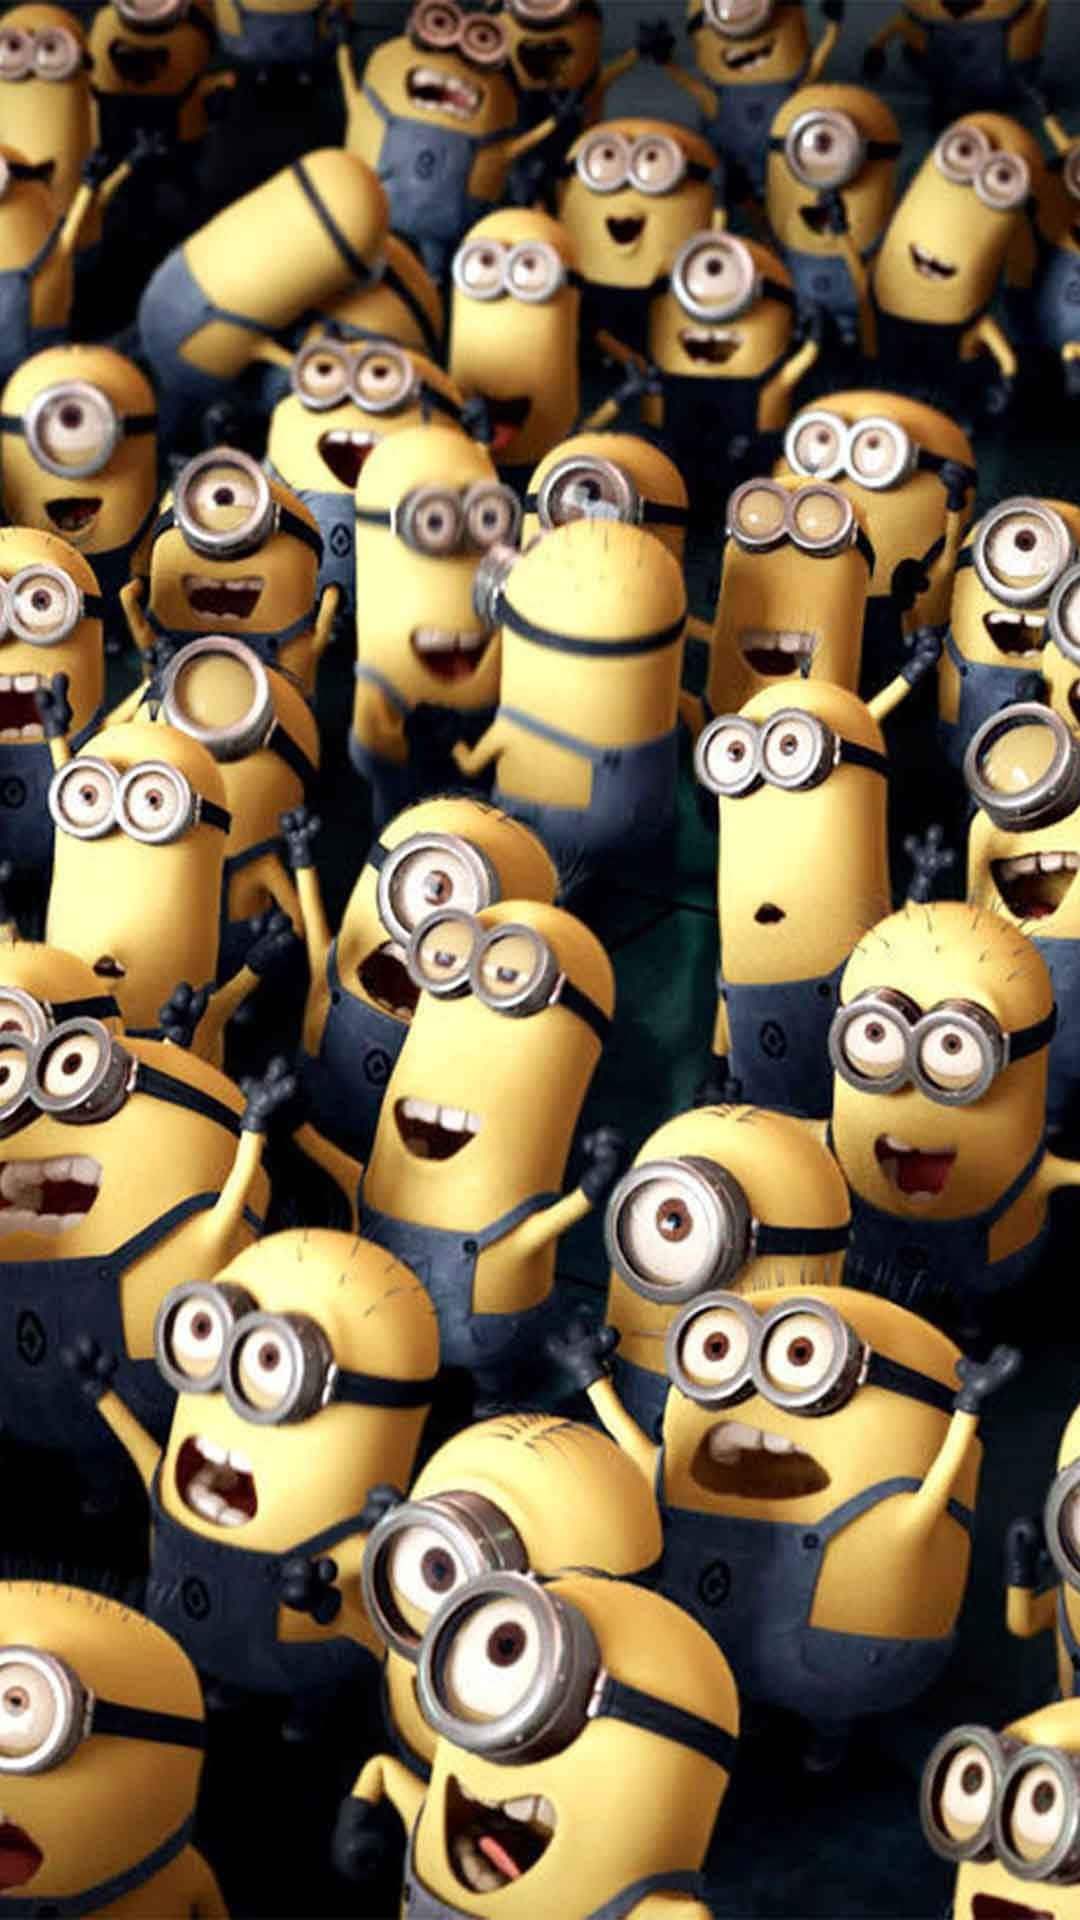 Shouting Despicable Me Minion Iphone Wallpaper